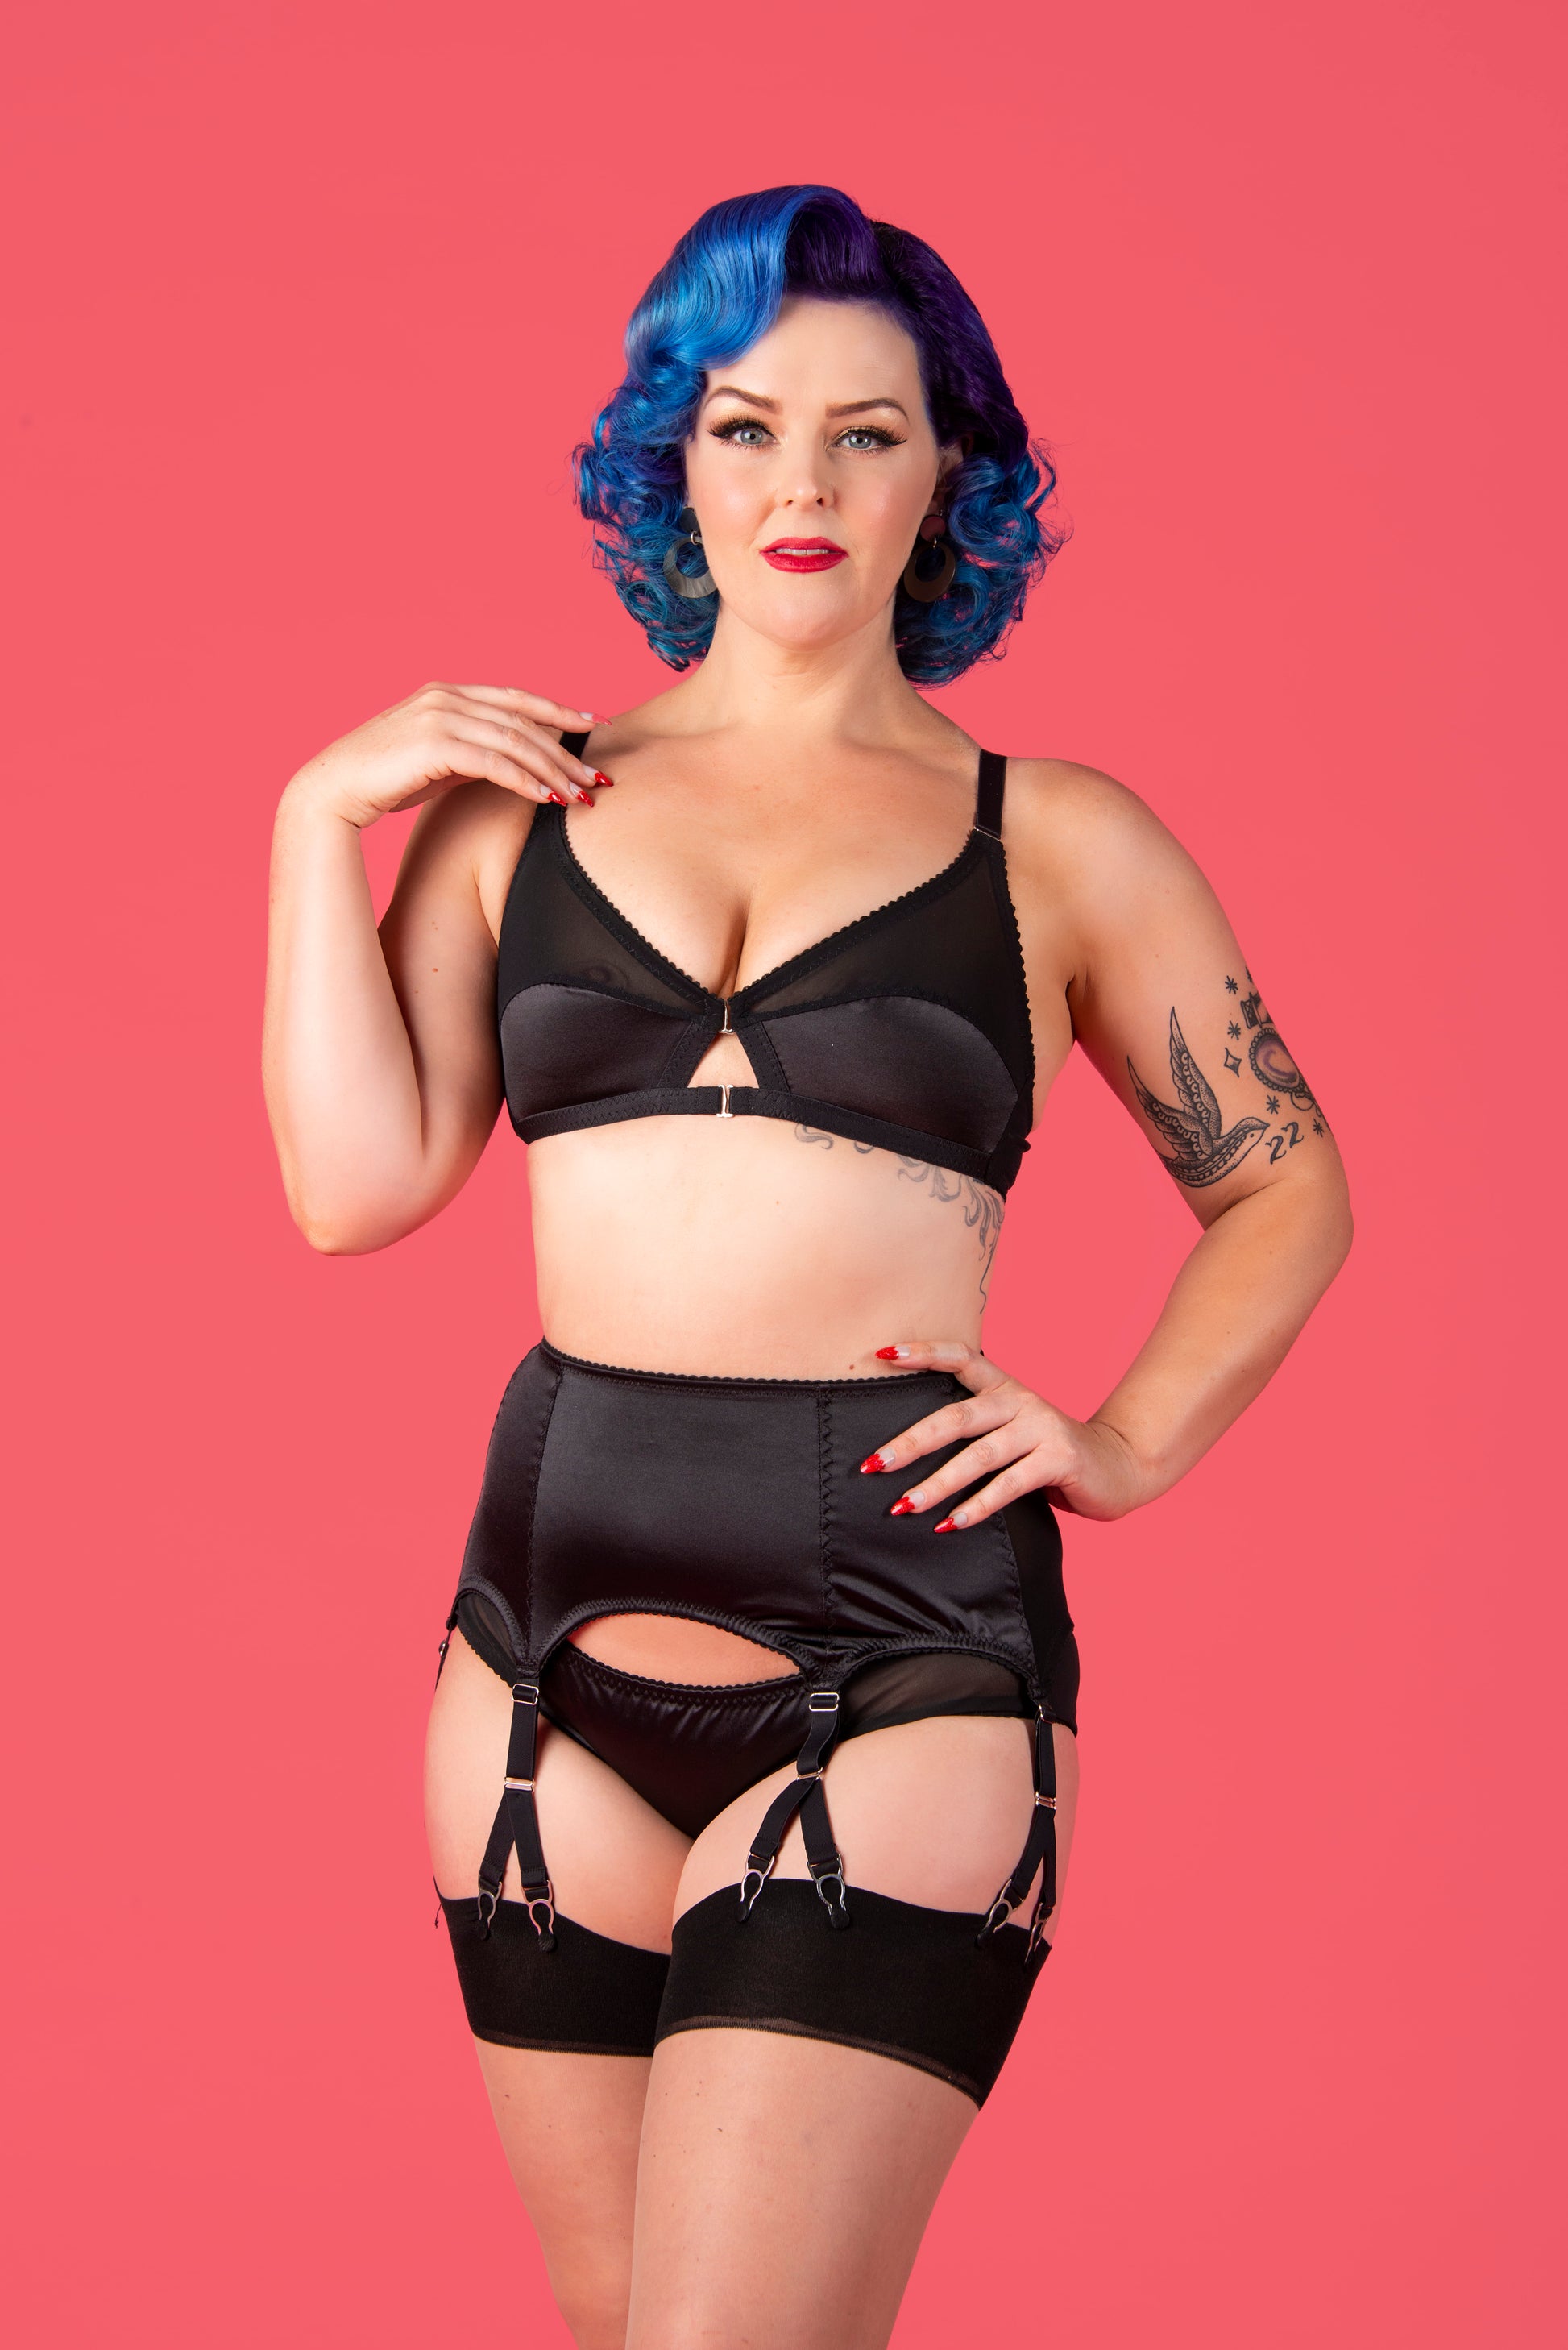 black classic satin 6 y-strap suspender garter belt with metal clips. vintage and retro inspired plus size lingerie by pip and pantalaimon. fetish pin up underwear Transgender non-binary underwear and lingerie